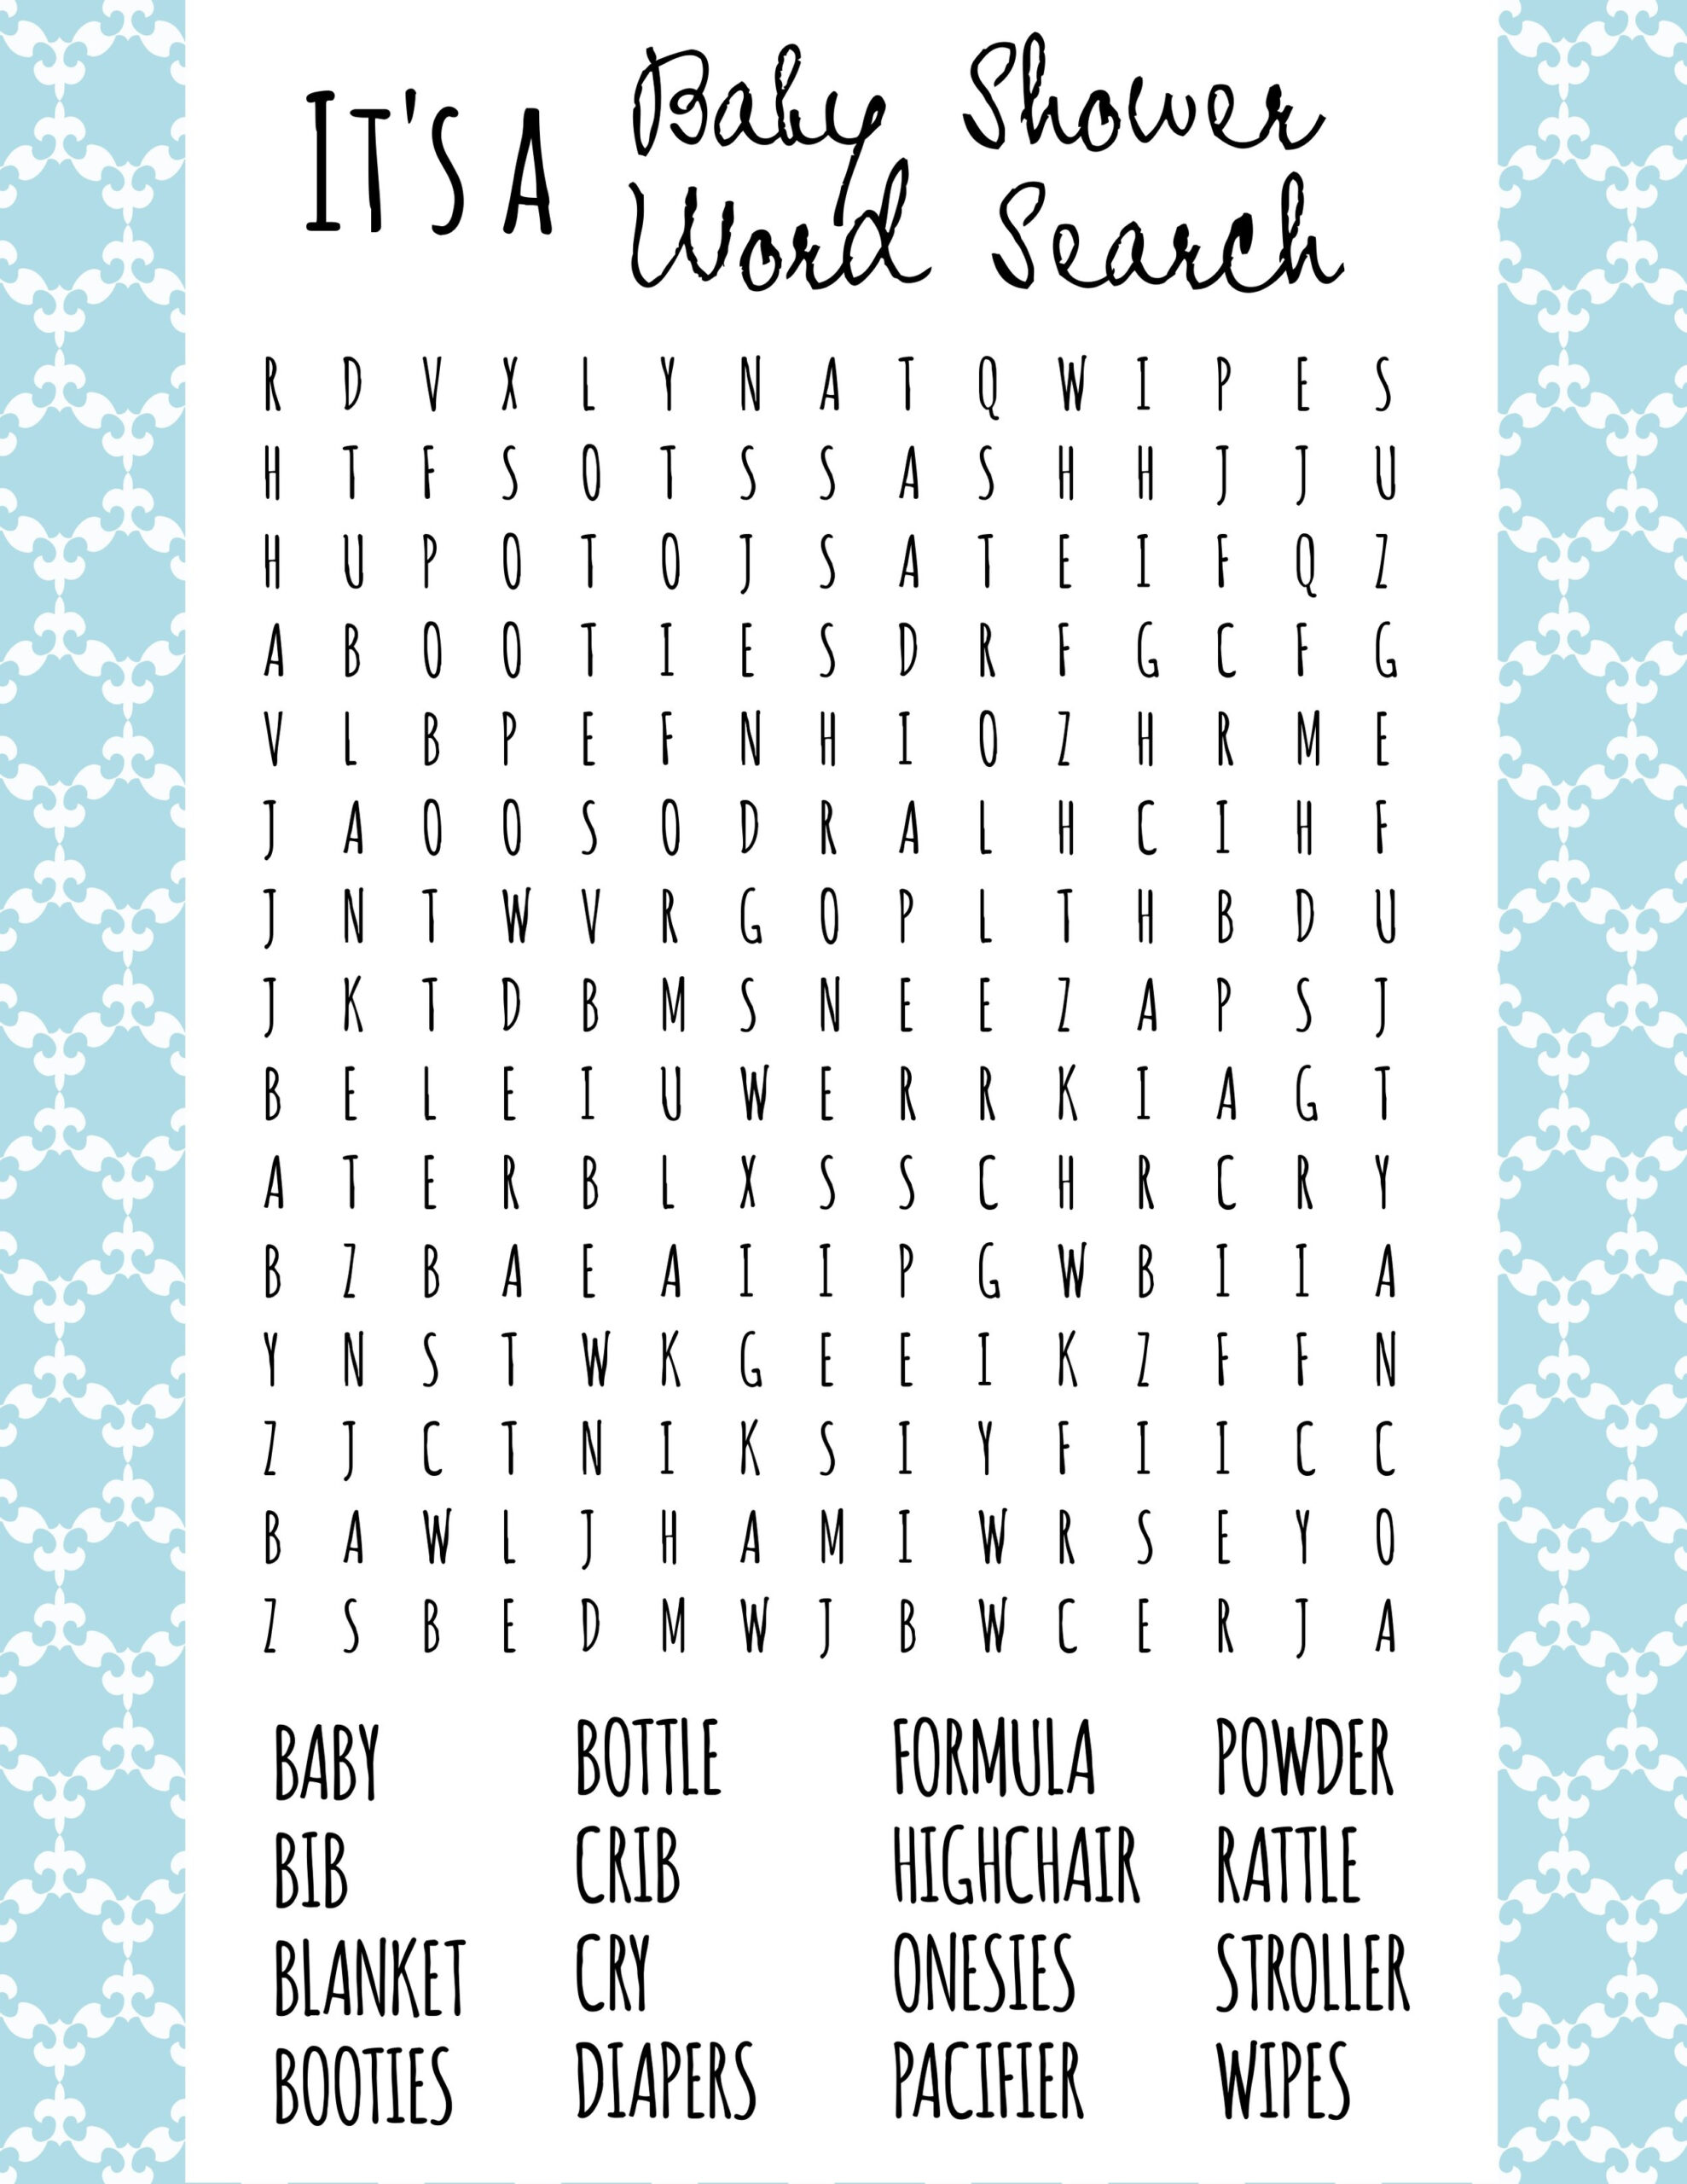 Free Printable Baby Shower Games - Download Instantly! in Free Printable Baby Shower Games